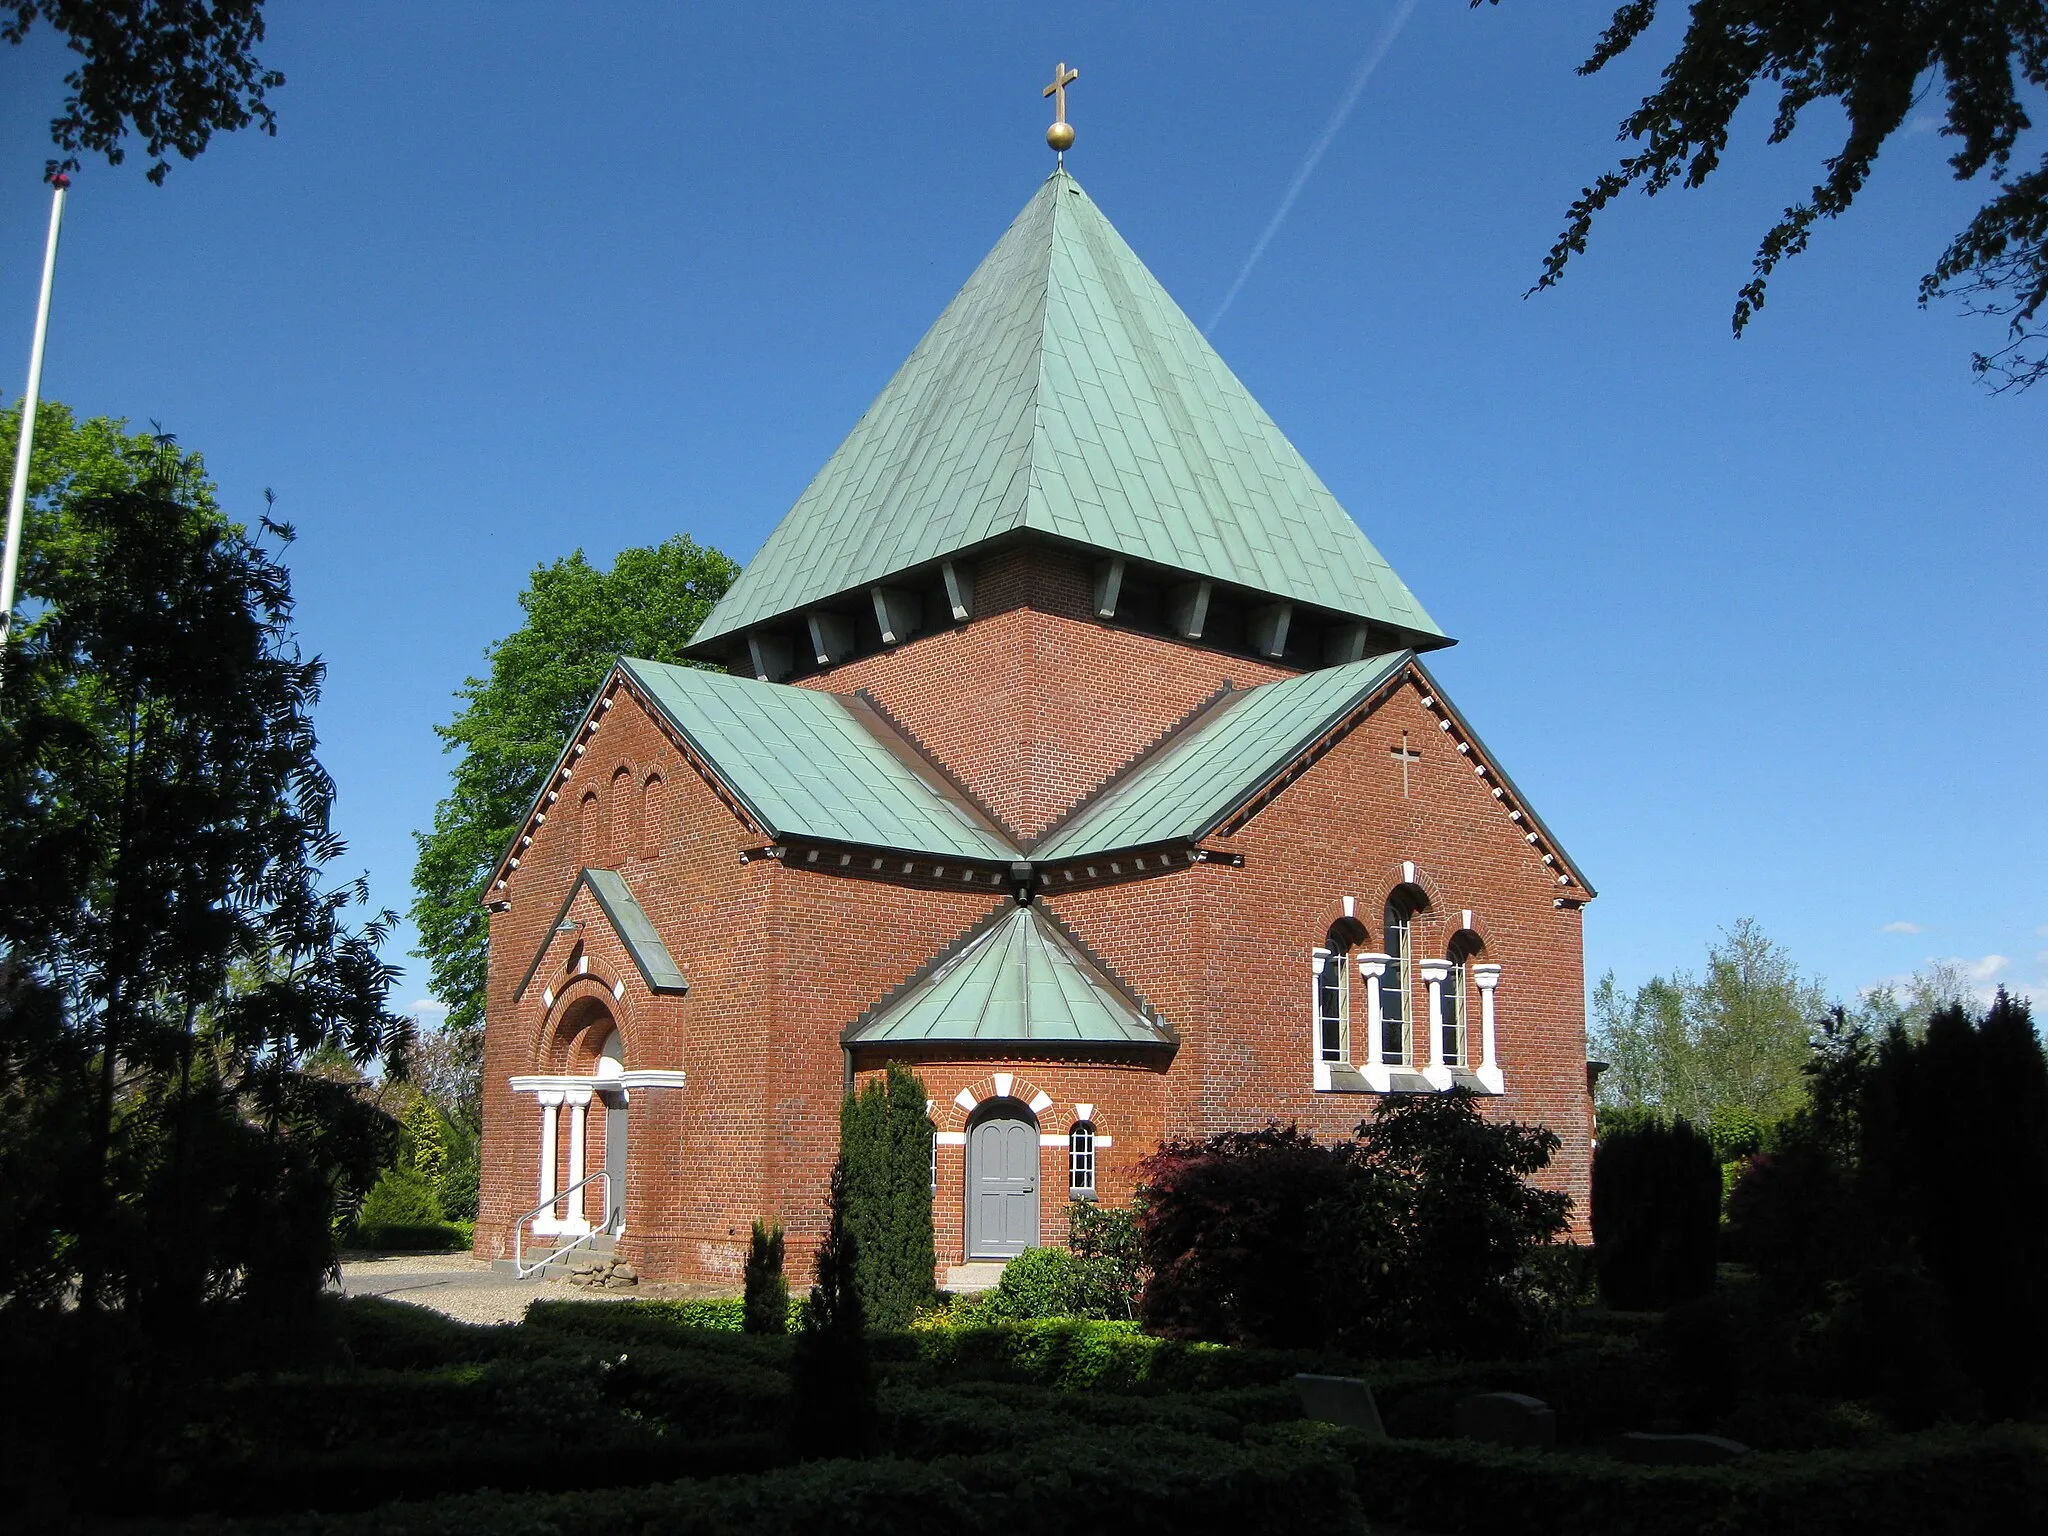 Photo showing: The church "Hovborg Kirke" in the village "Hovborg". The village is located in Vejen Kommune, South-Central Jutland, Denmark.